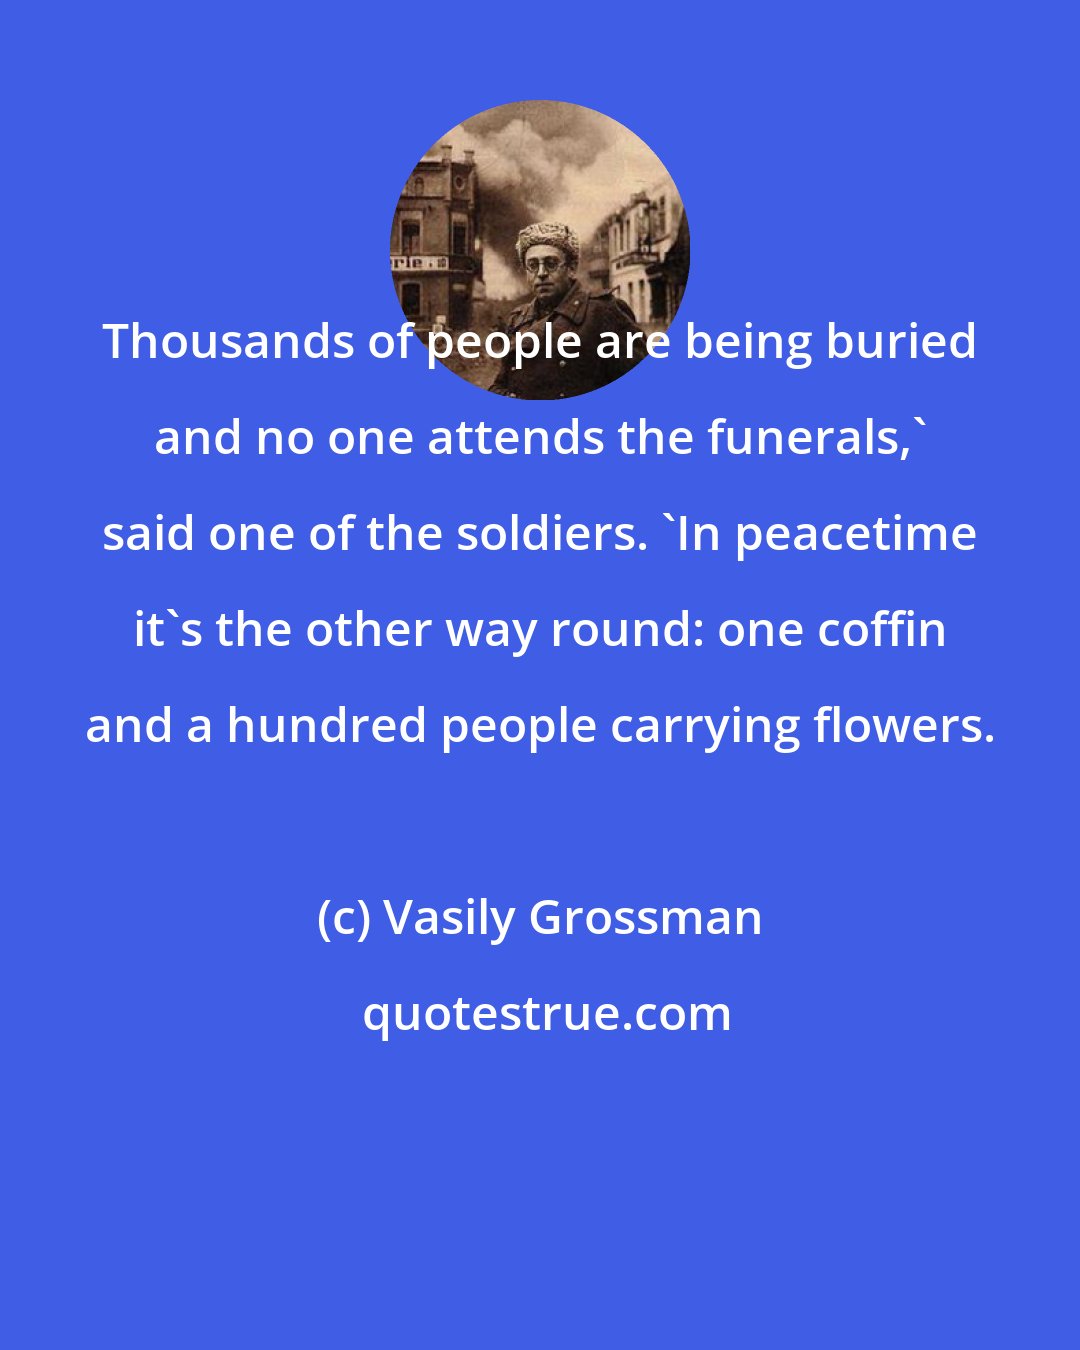 Vasily Grossman: Thousands of people are being buried and no one attends the funerals,' said one of the soldiers. 'In peacetime it's the other way round: one coffin and a hundred people carrying flowers.